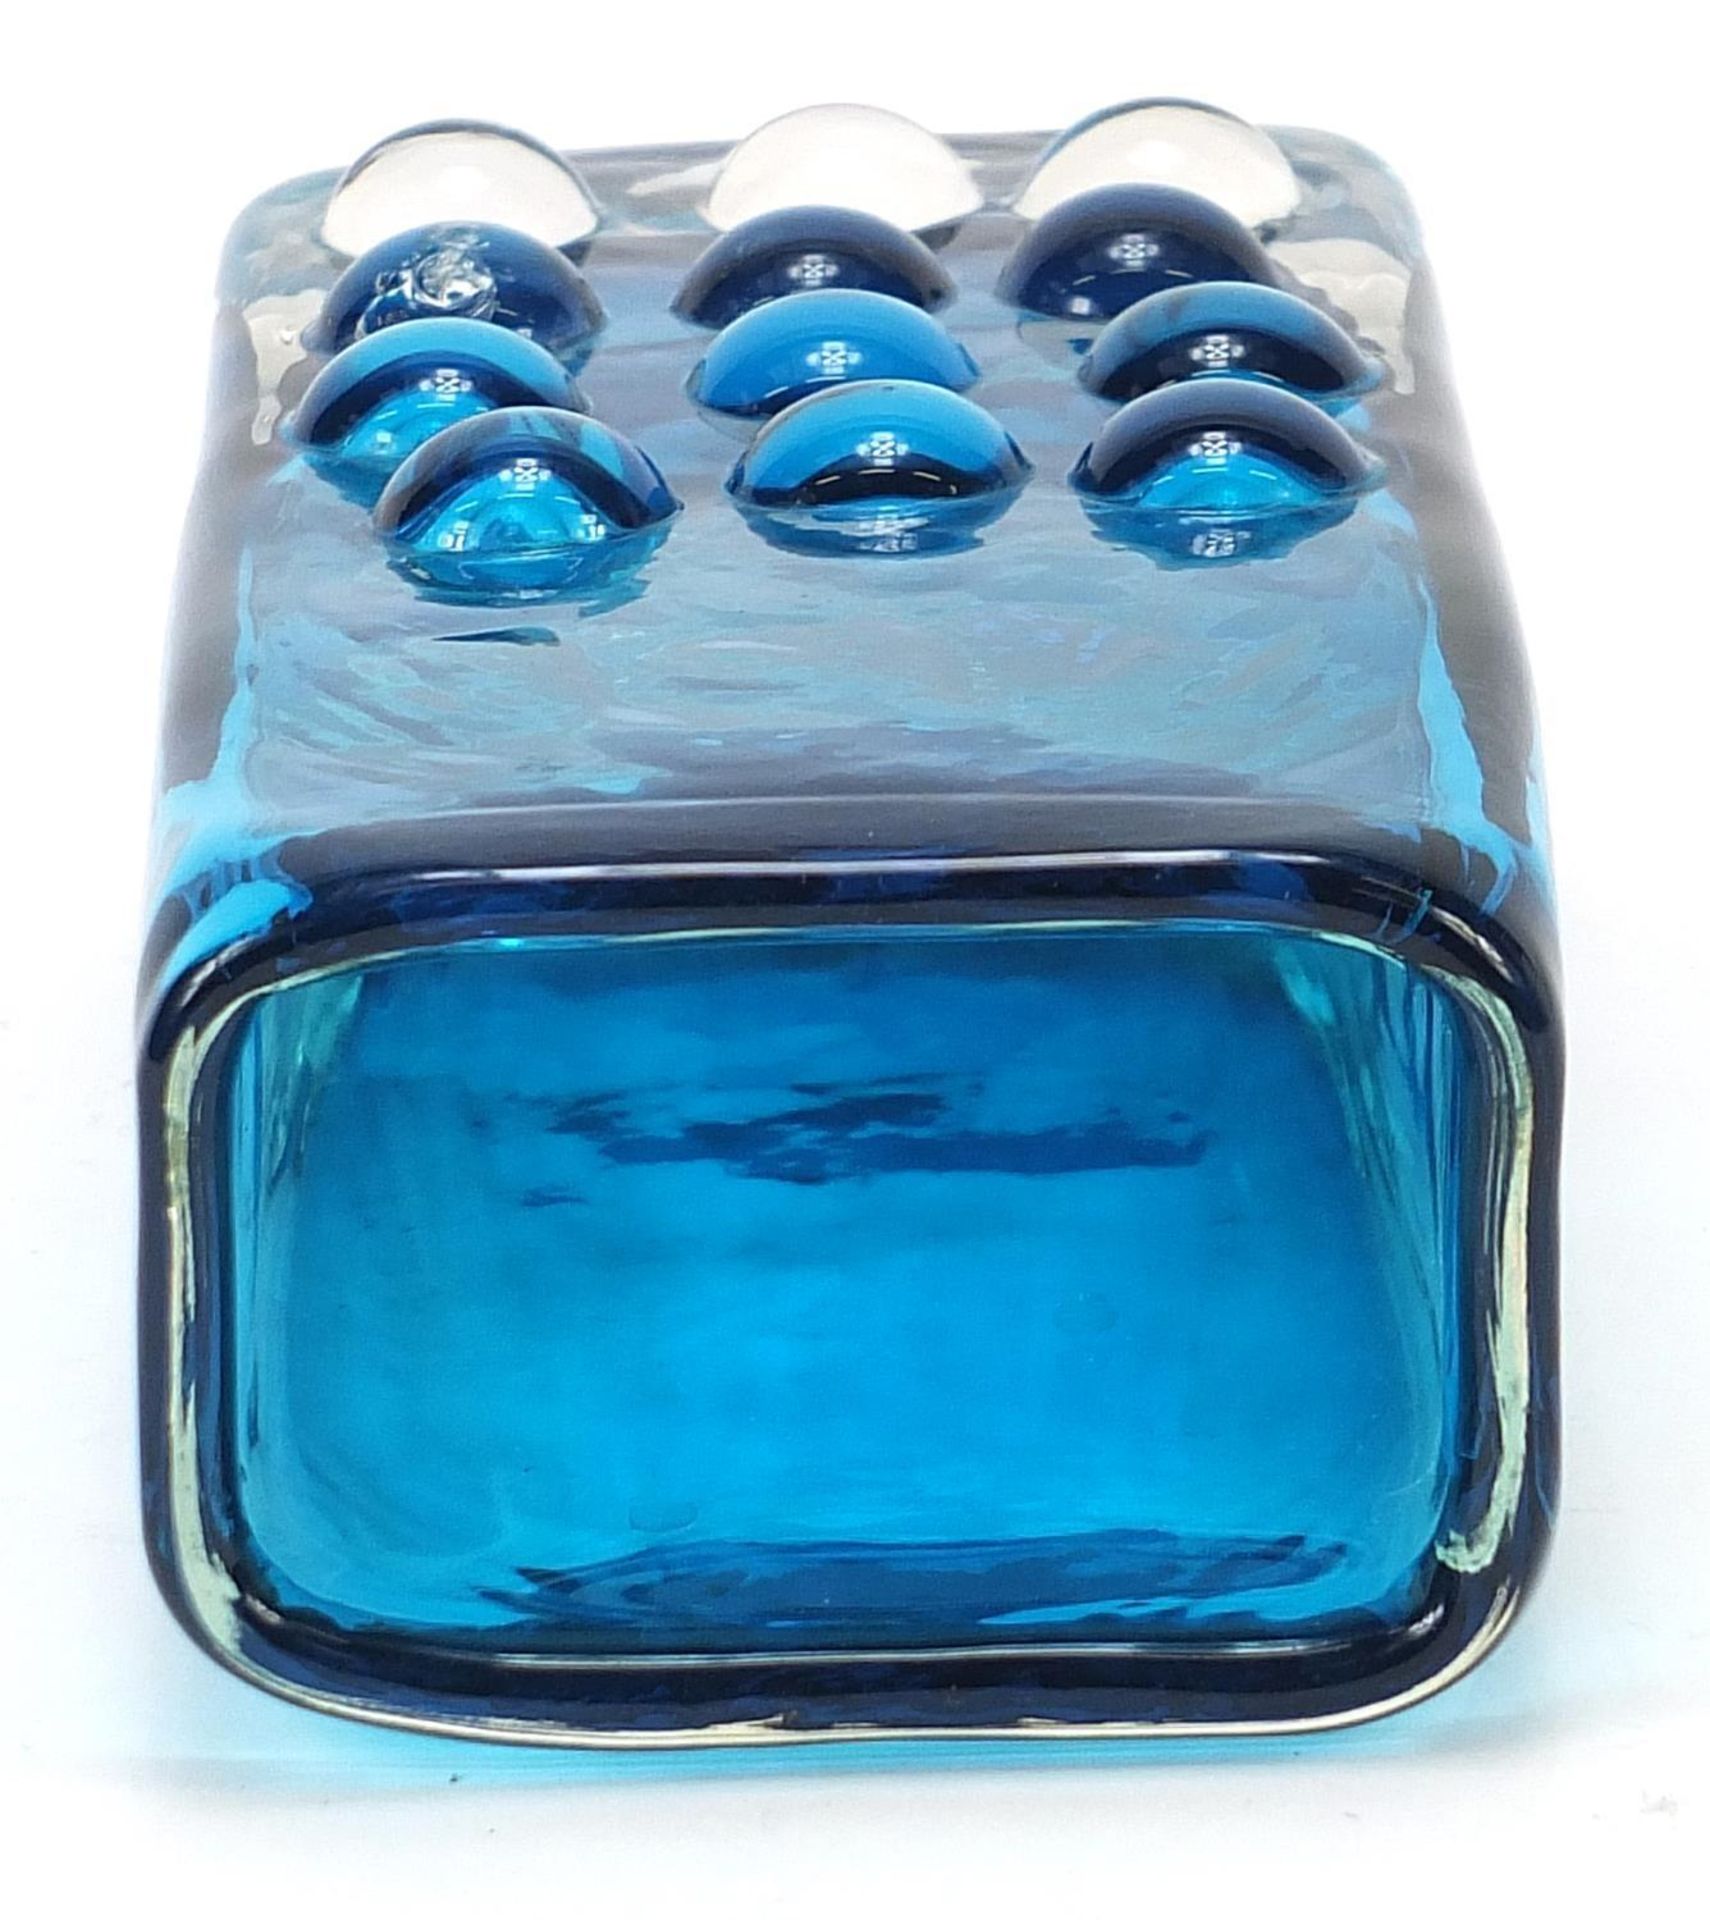 Geoffrey Baxter for Whitefriars, telephone glass vase in kingfisher blue, 17cm high - Image 3 of 4